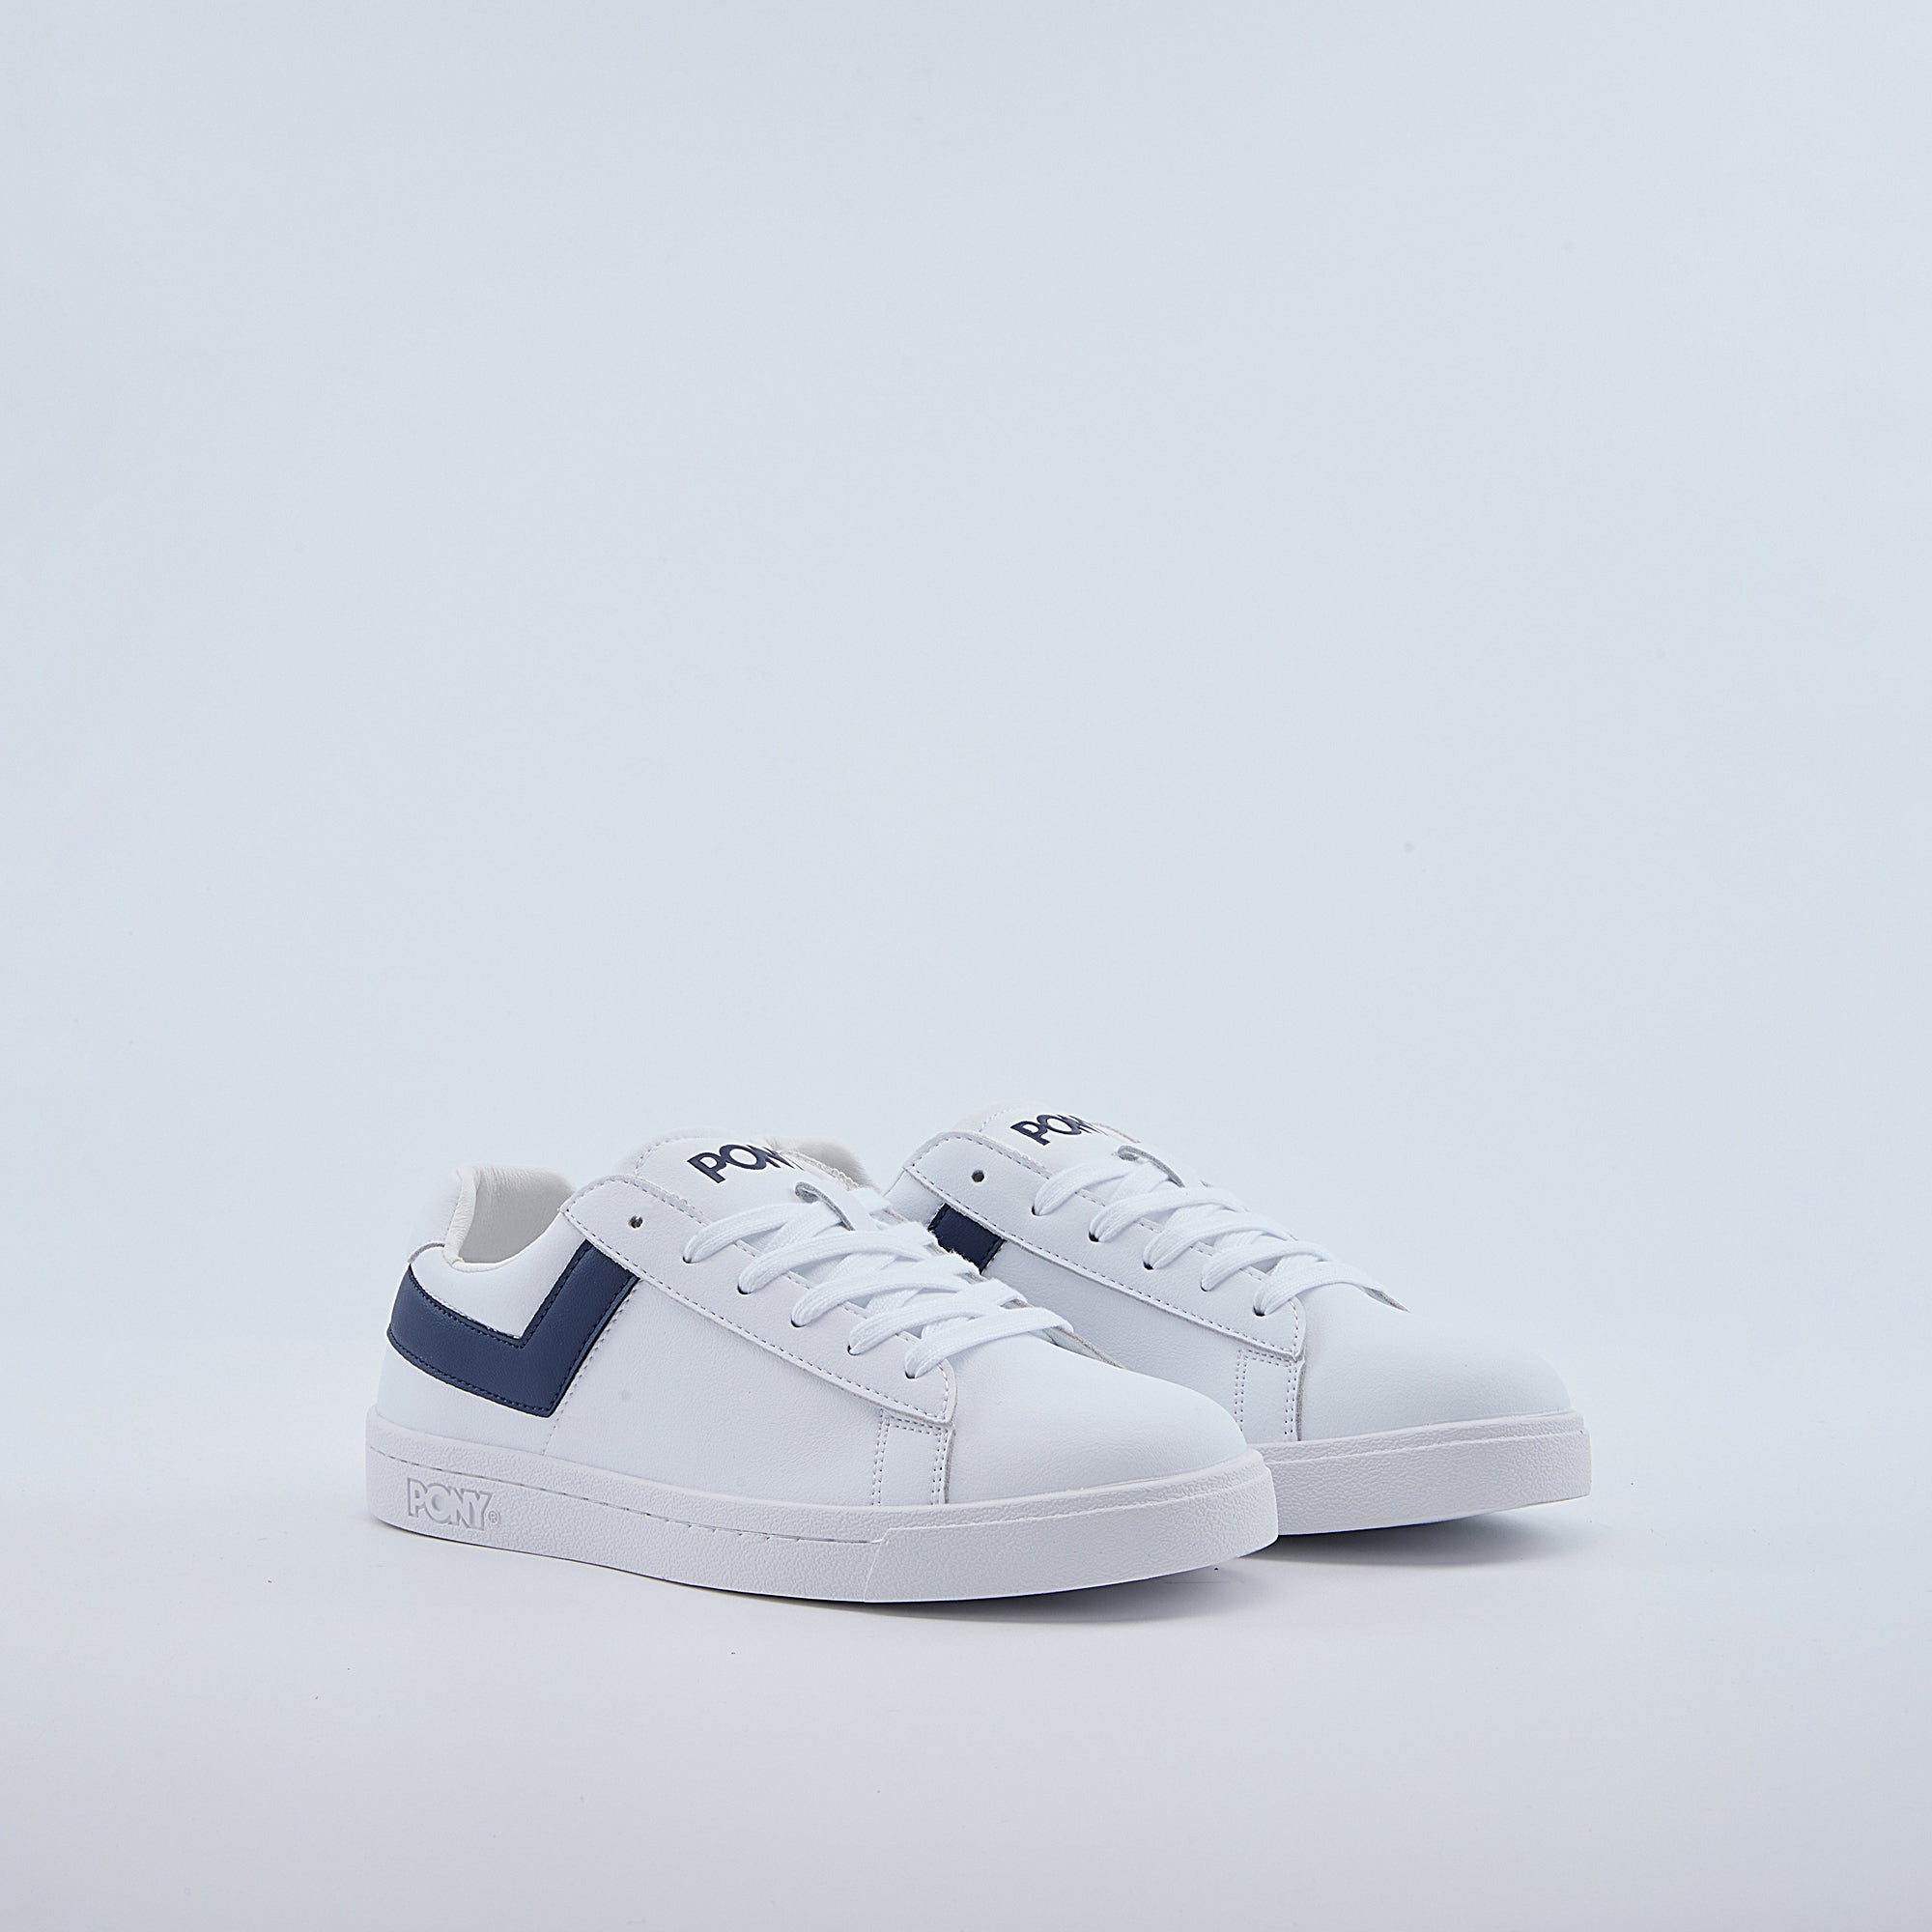 Pony Men's Top Star Sneakers with White Main Lace/Ext Lace Navy as Chevron Marine